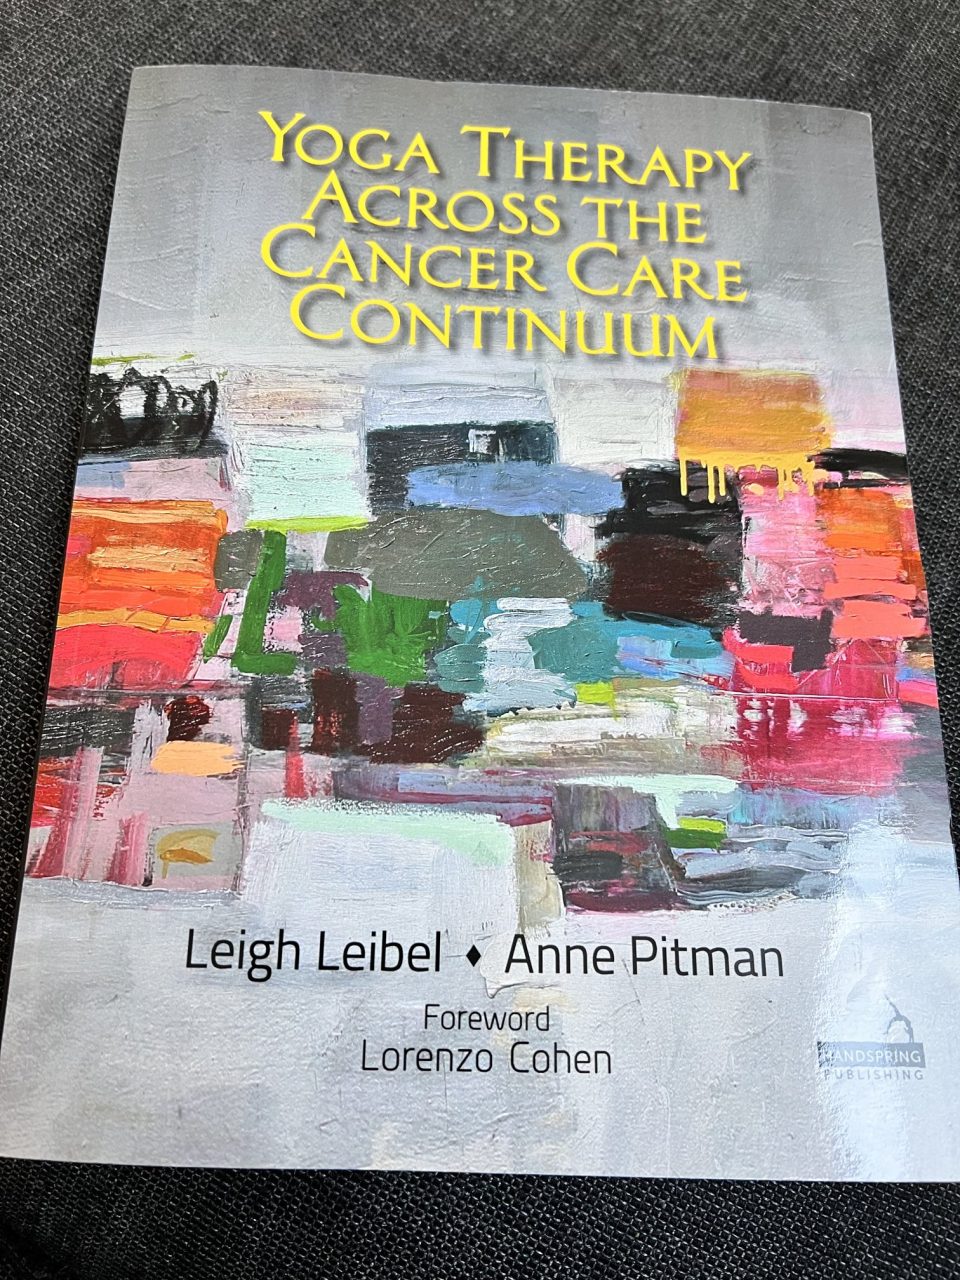 Leigh Leibel and Anne Pitman have put together a superb book on yogatherapy across the cancer continuum – Judith Lacey